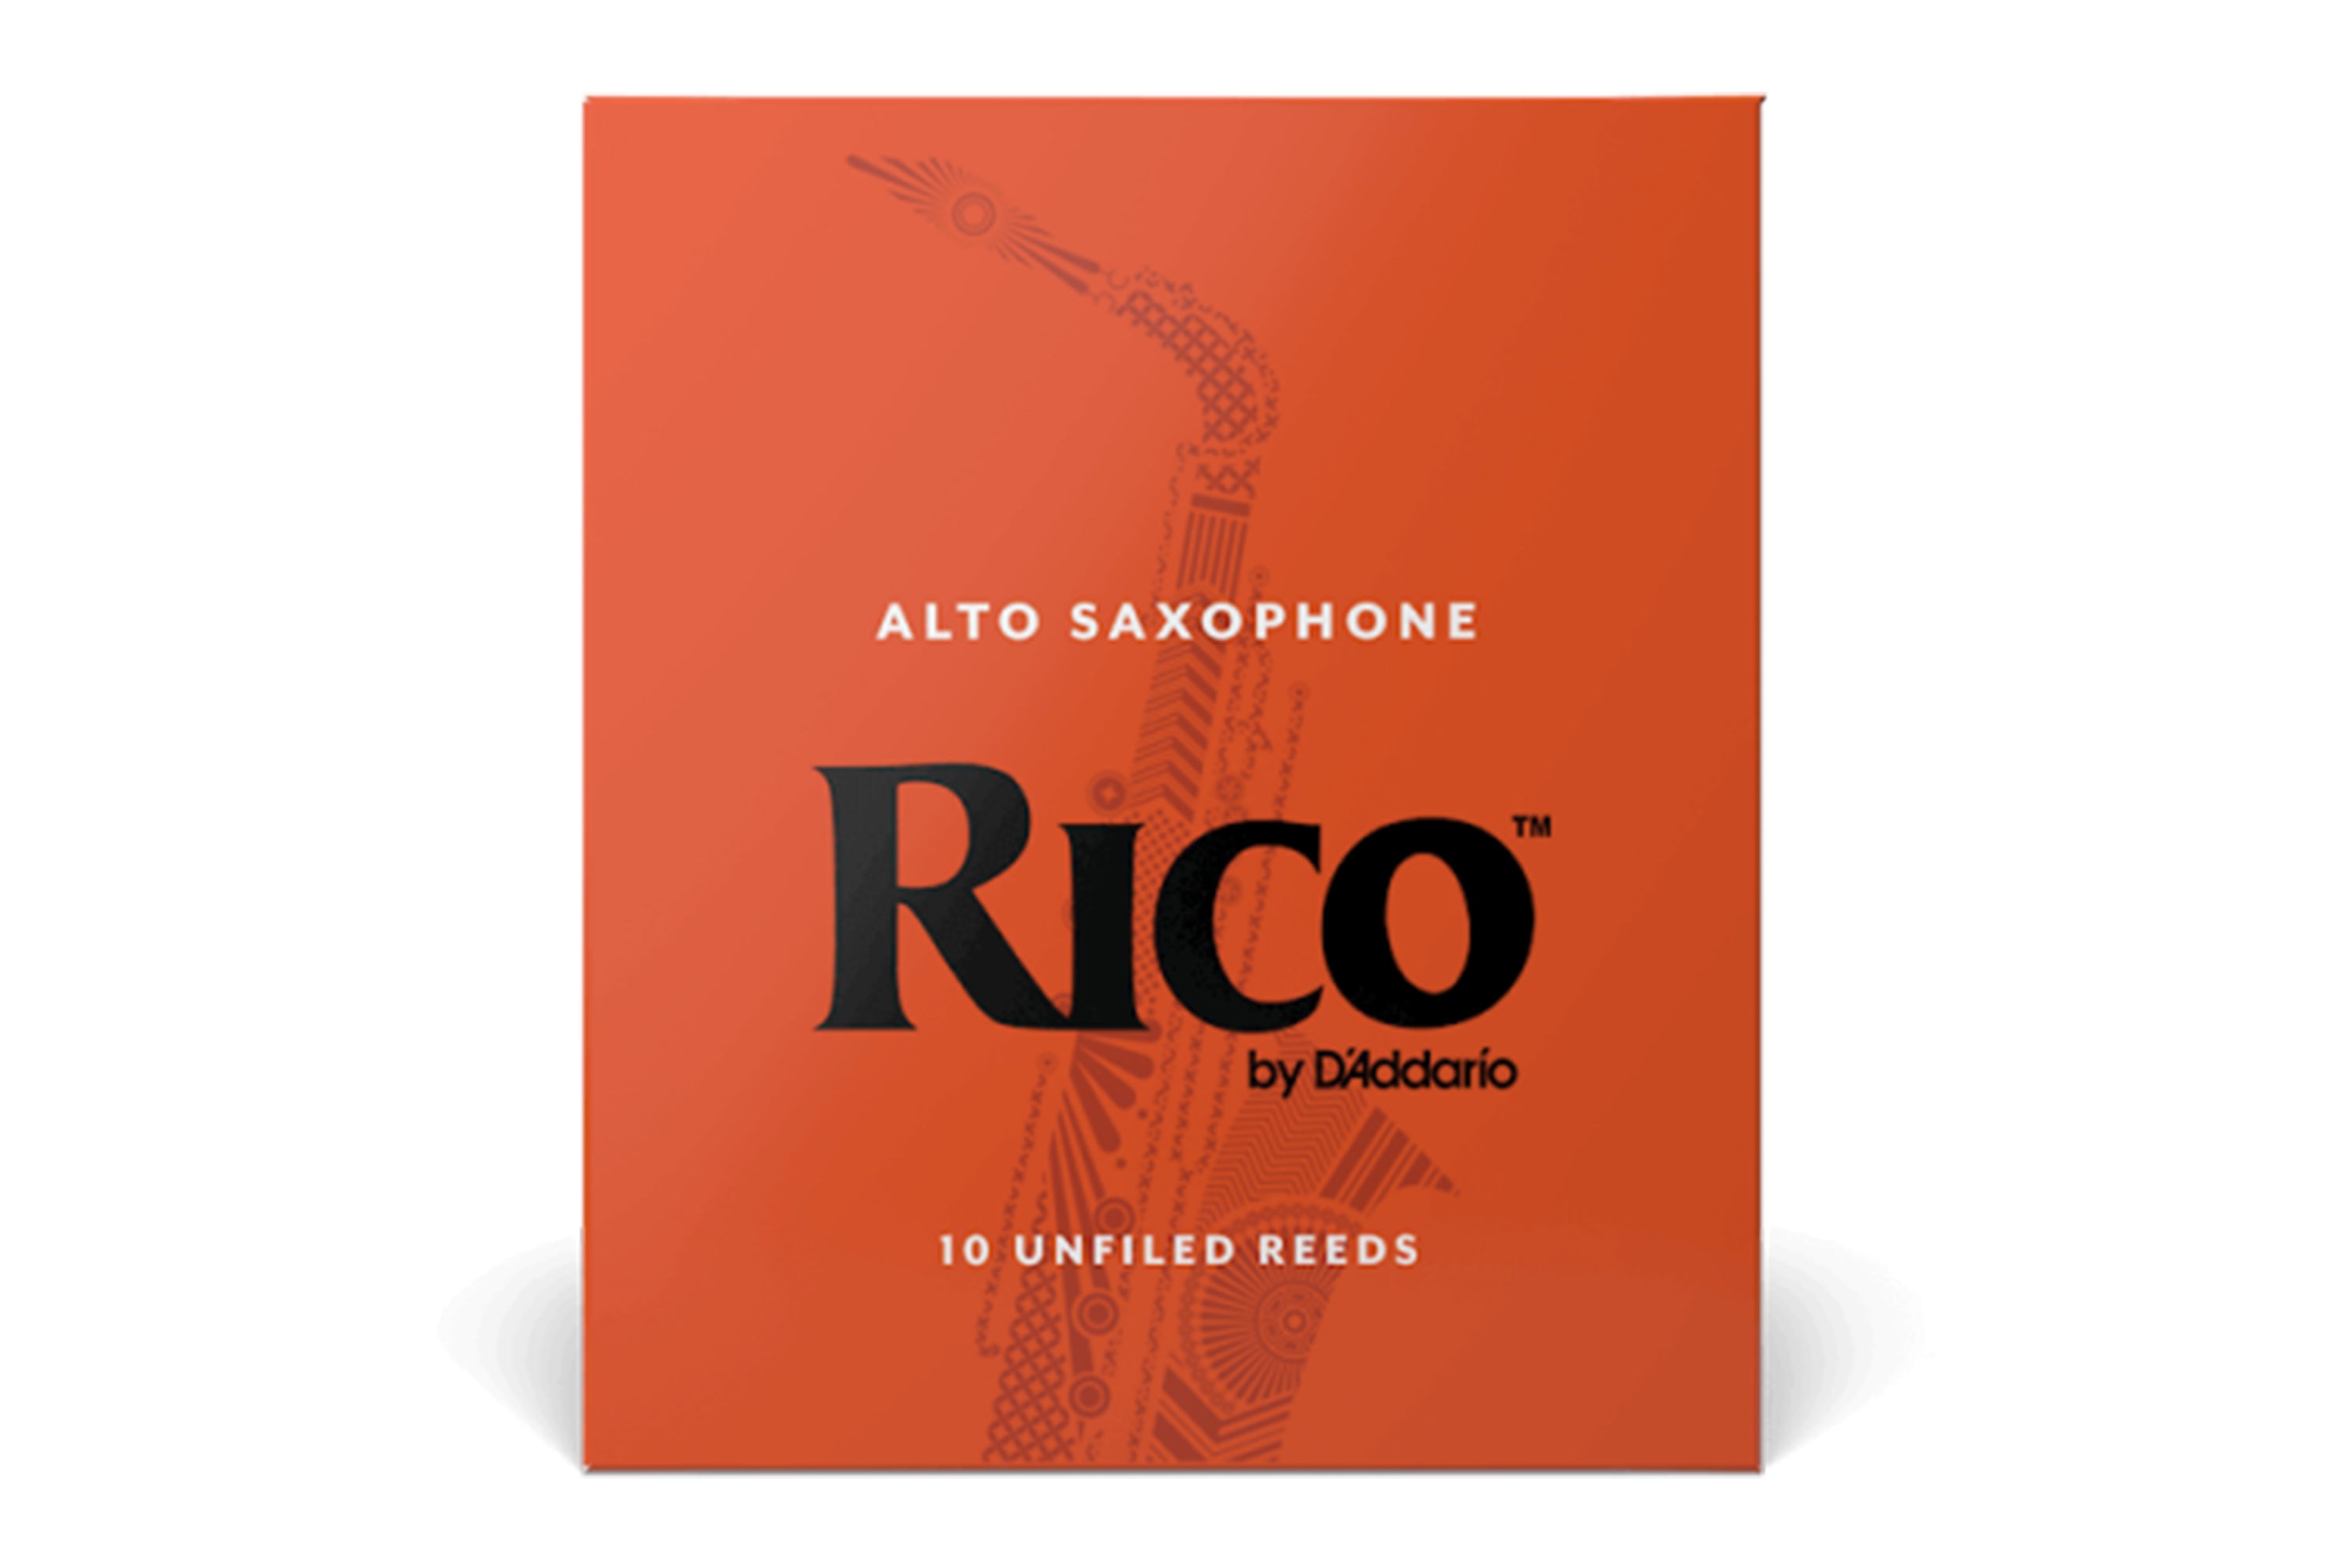 Rico by D'Addario Alto Saxophone Reeds Strength 2.5 - 10 Pack